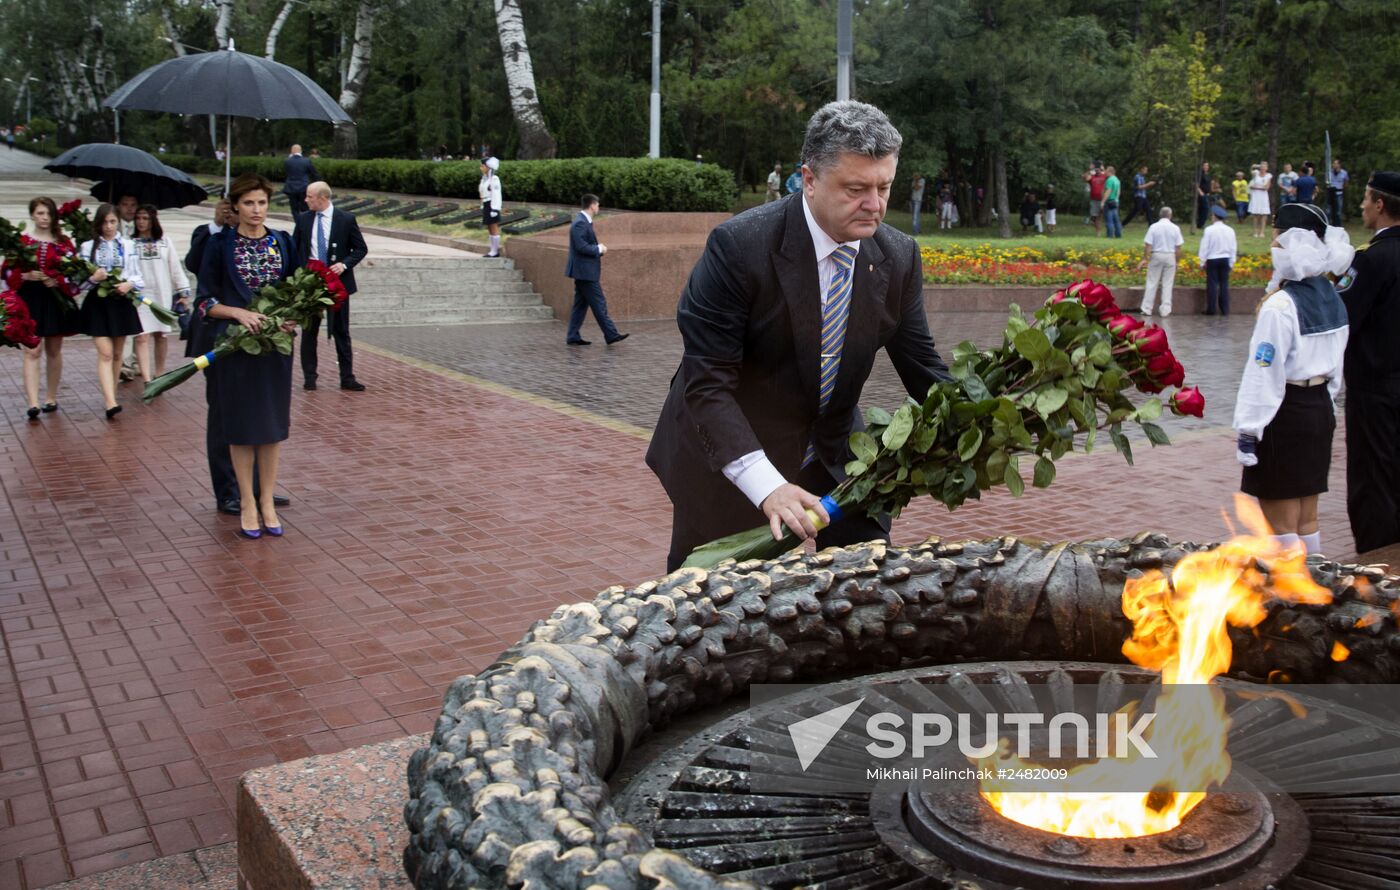 Petro Poroshenko arives in Odessa to congratulate its residents on Ukraine's Independence Day